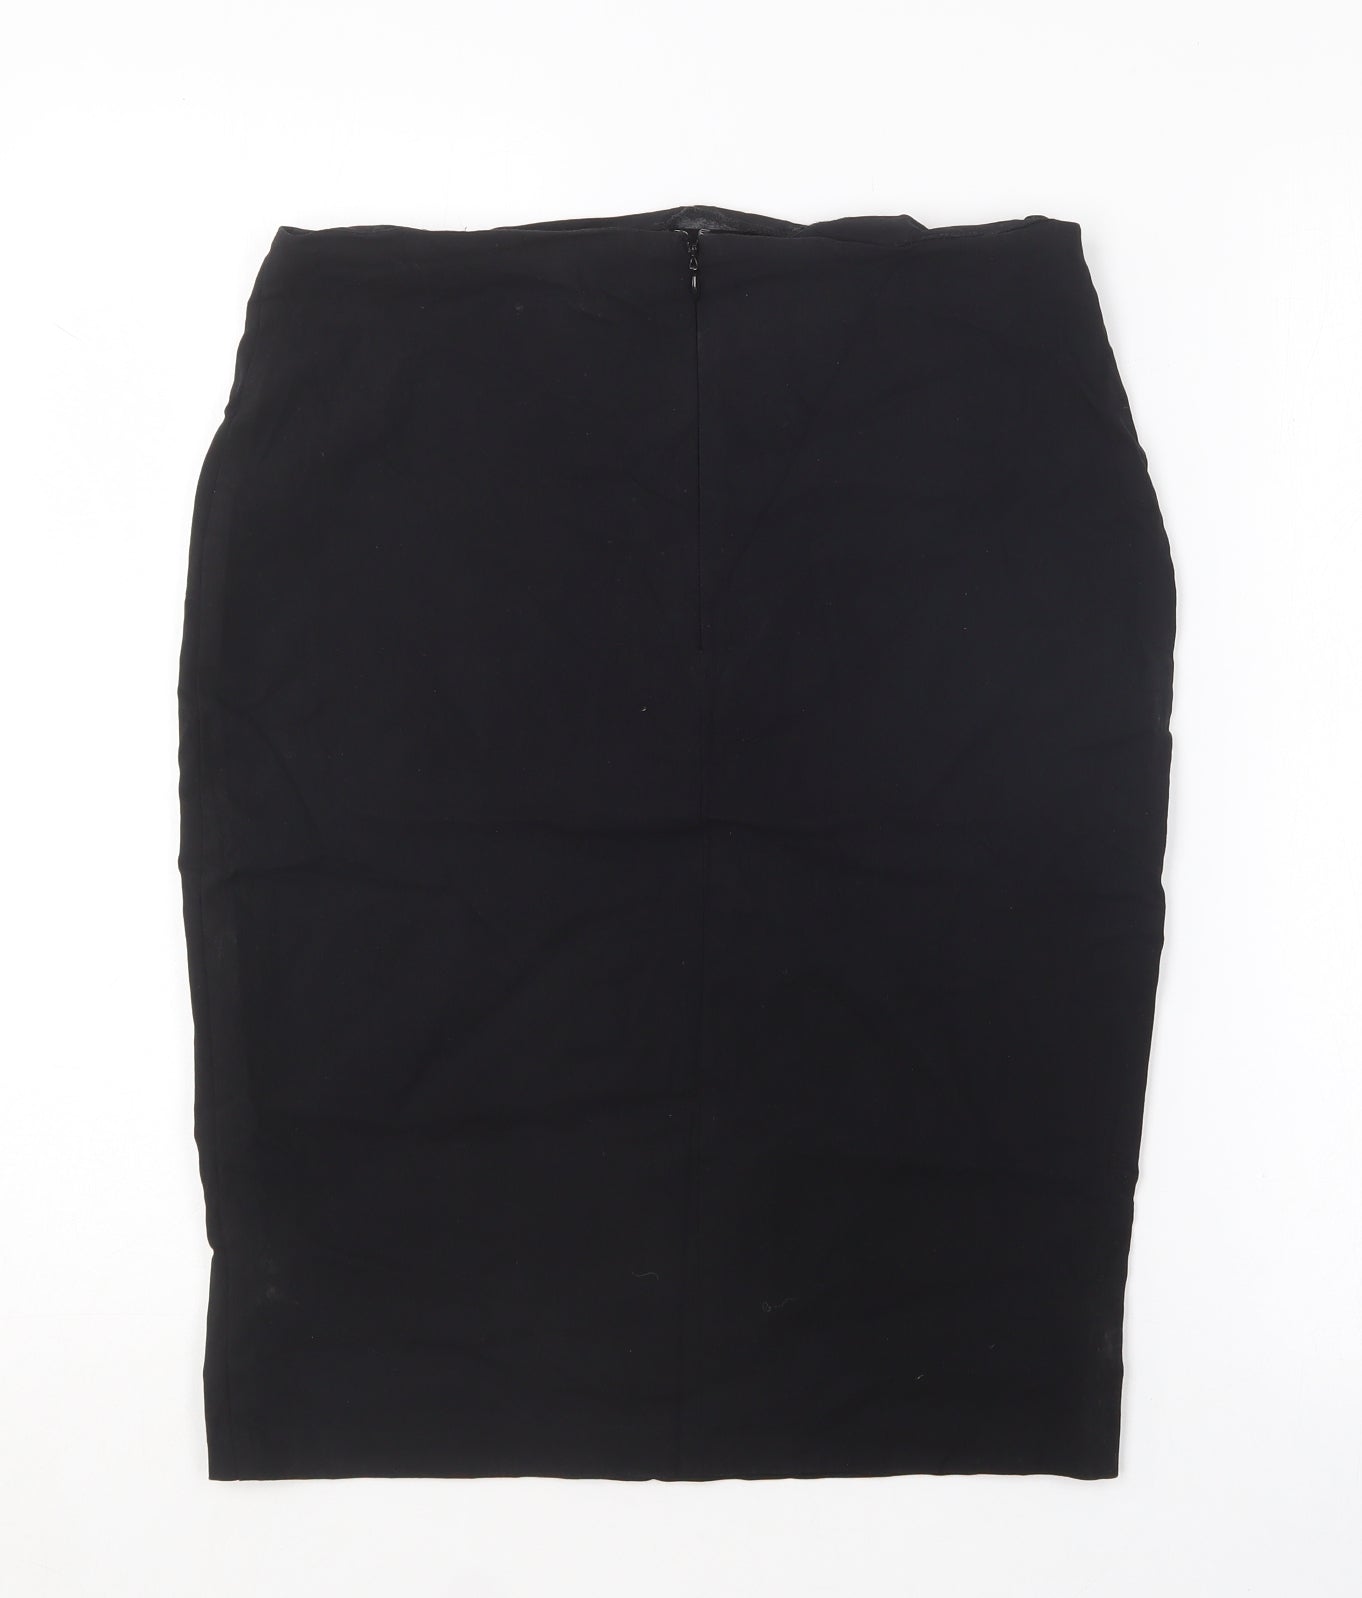 Primark Faux Leather Skirts for Women for sale | eBay